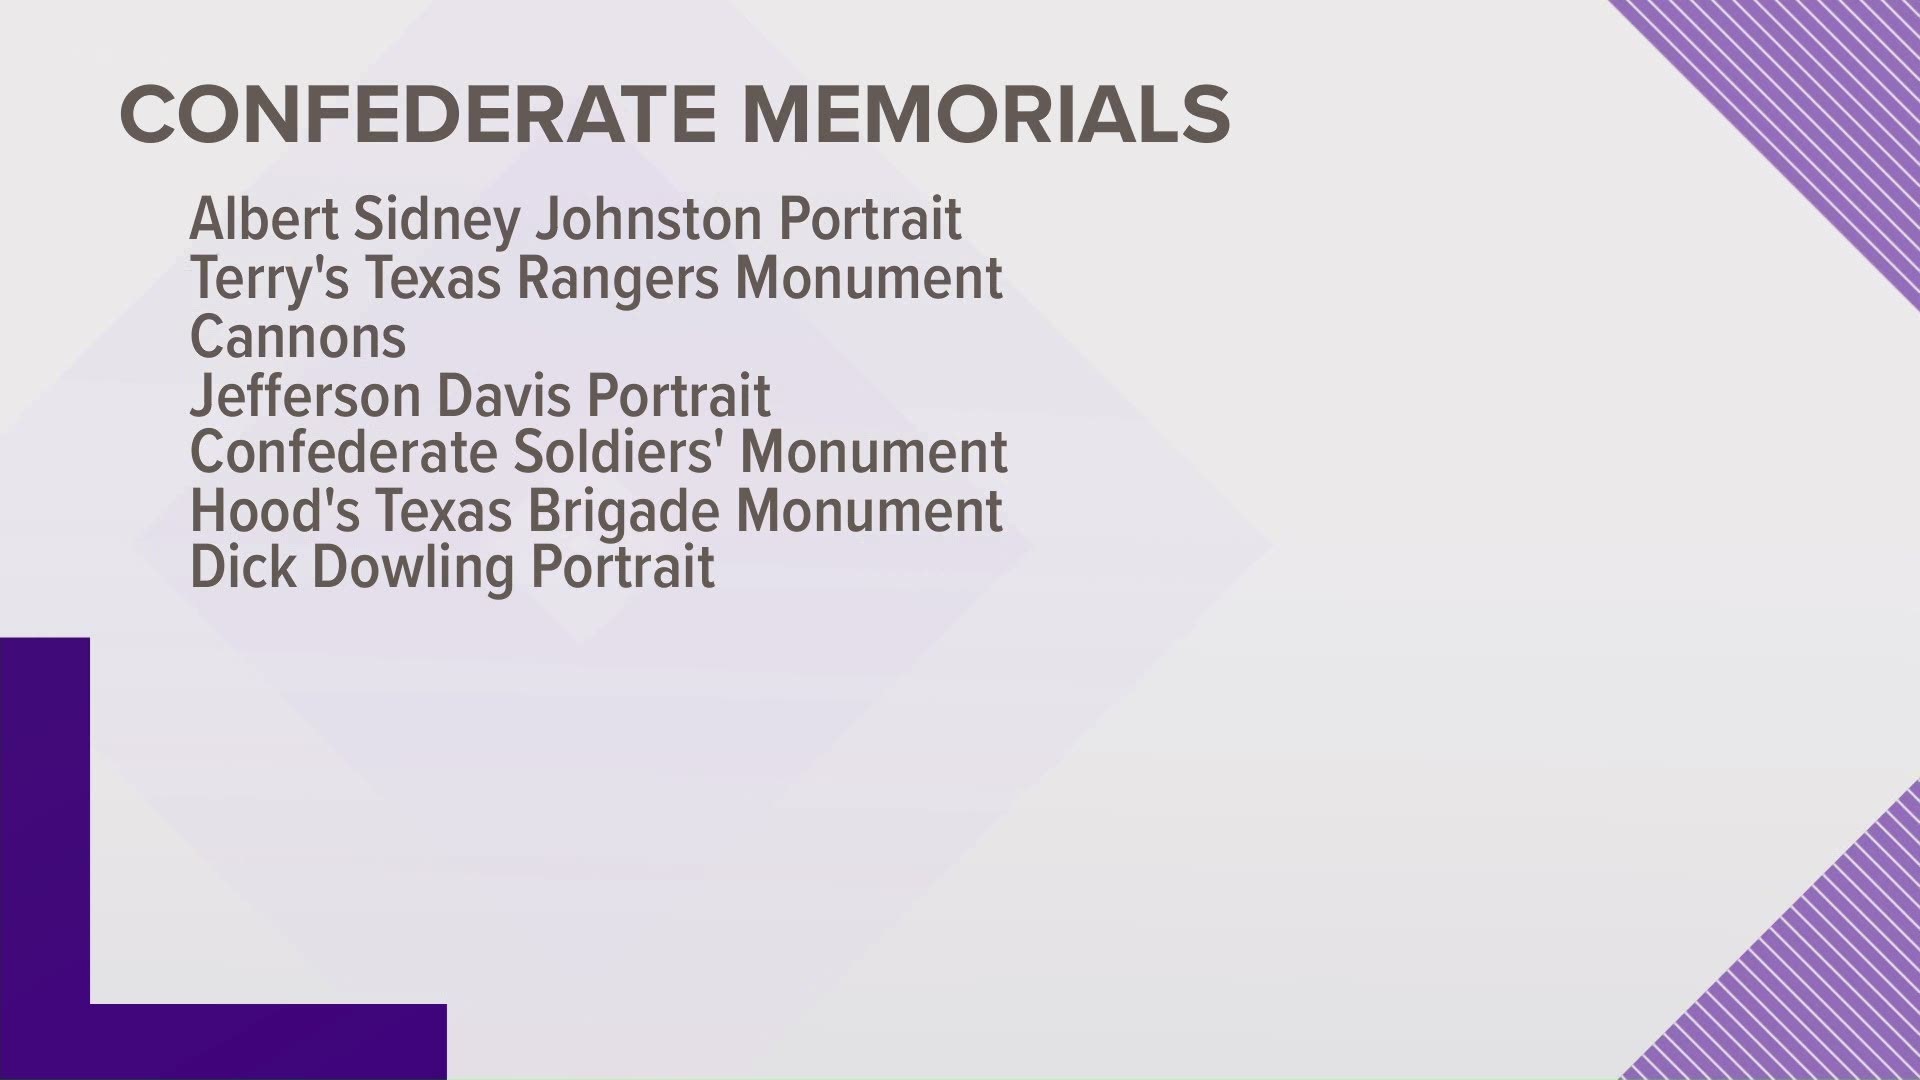 Some Democratic lawmakers are calling for the removal of seven Confederate memorials on the Texas State Capitol grounds.